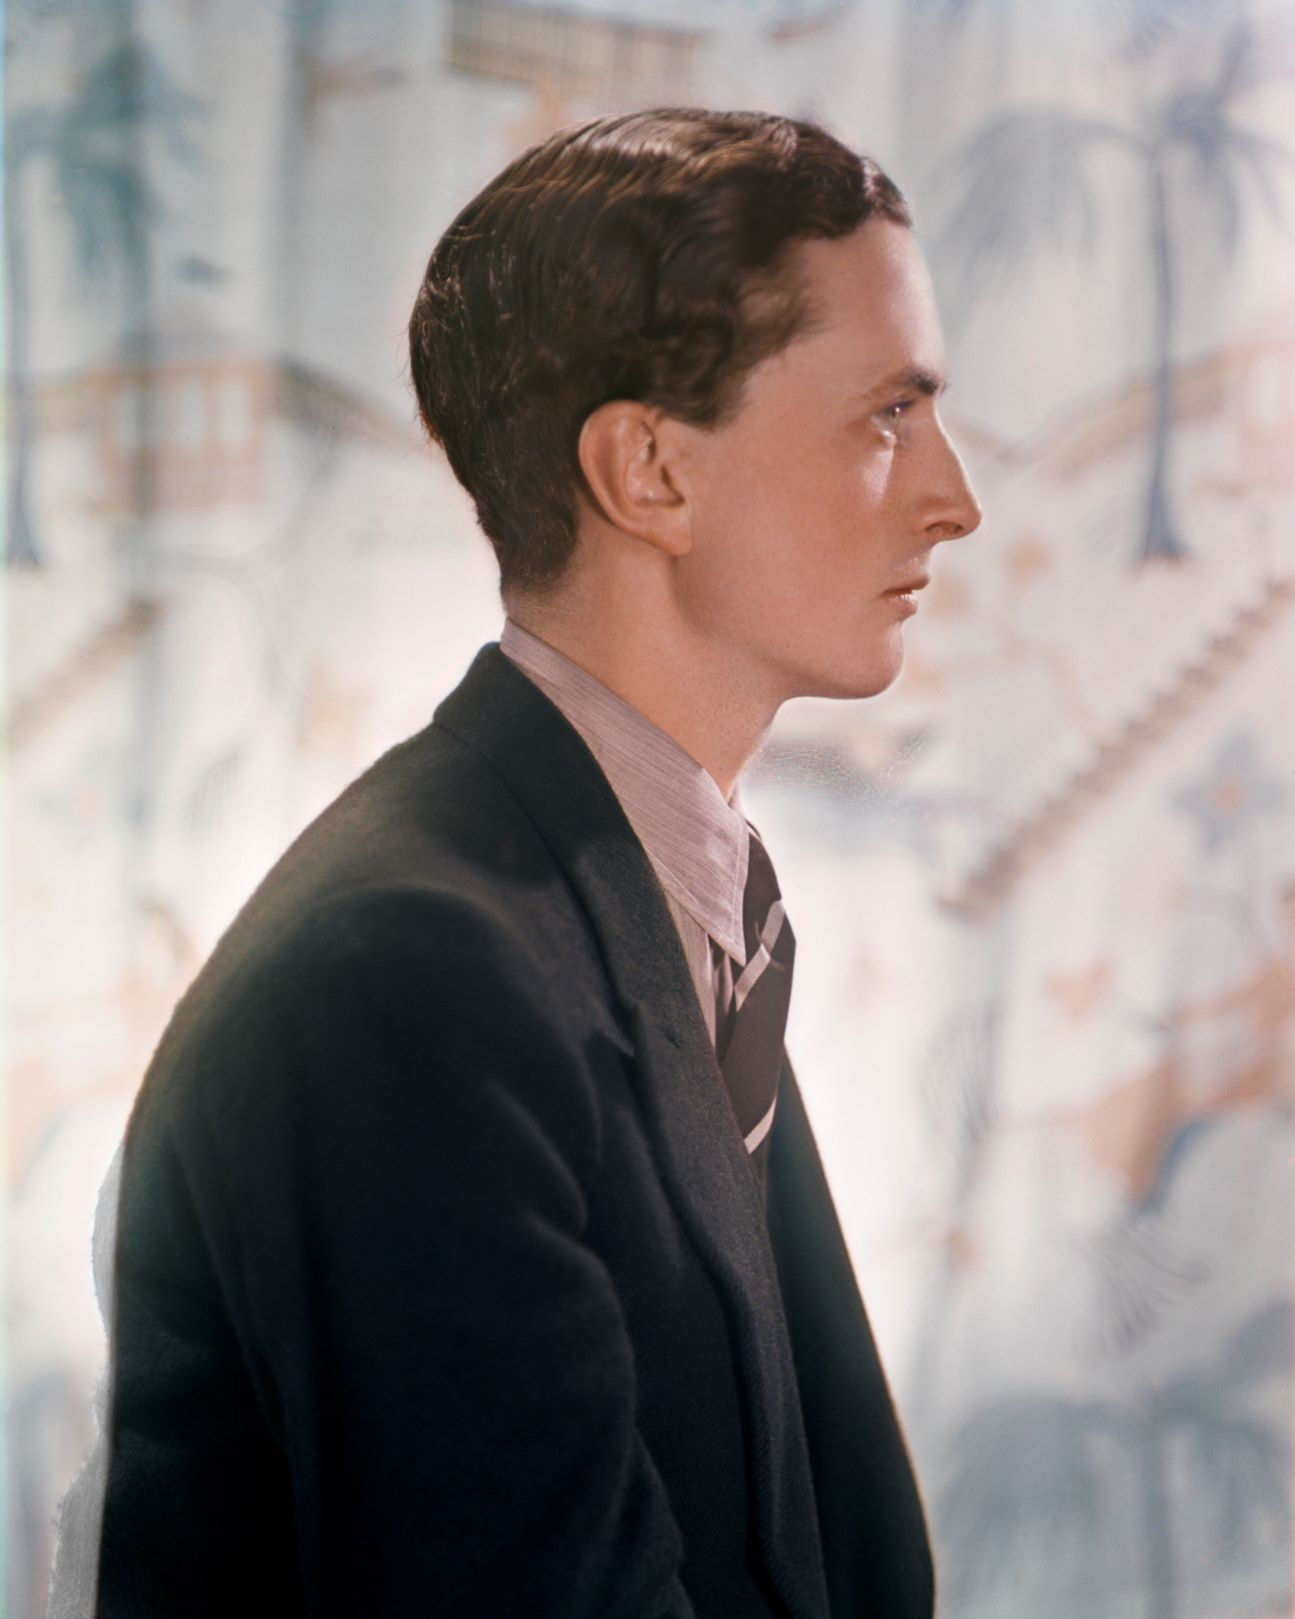 Edward James by Yevonde (1933), purchased with support from the Portrait Fund, 2021 © National Portrait Gallery, London